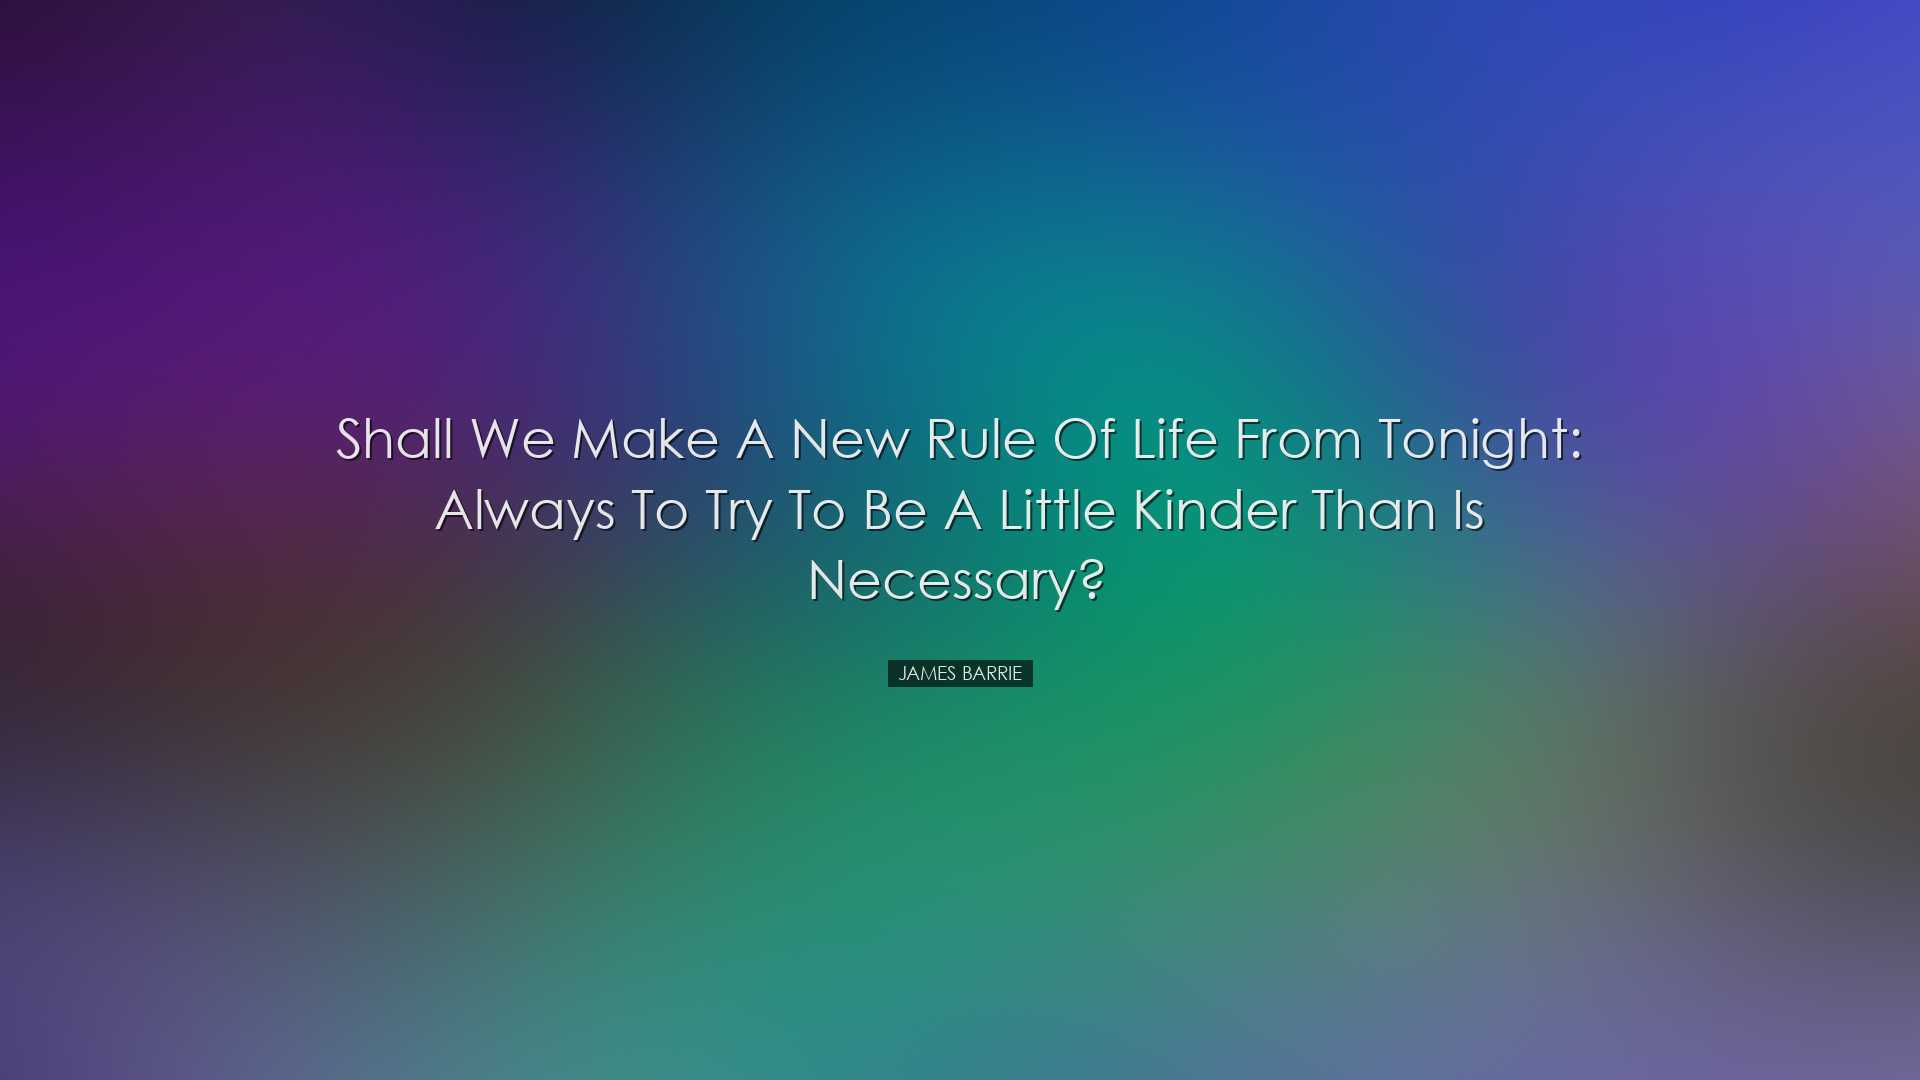 Shall we make a new rule of life from tonight: always to try to be